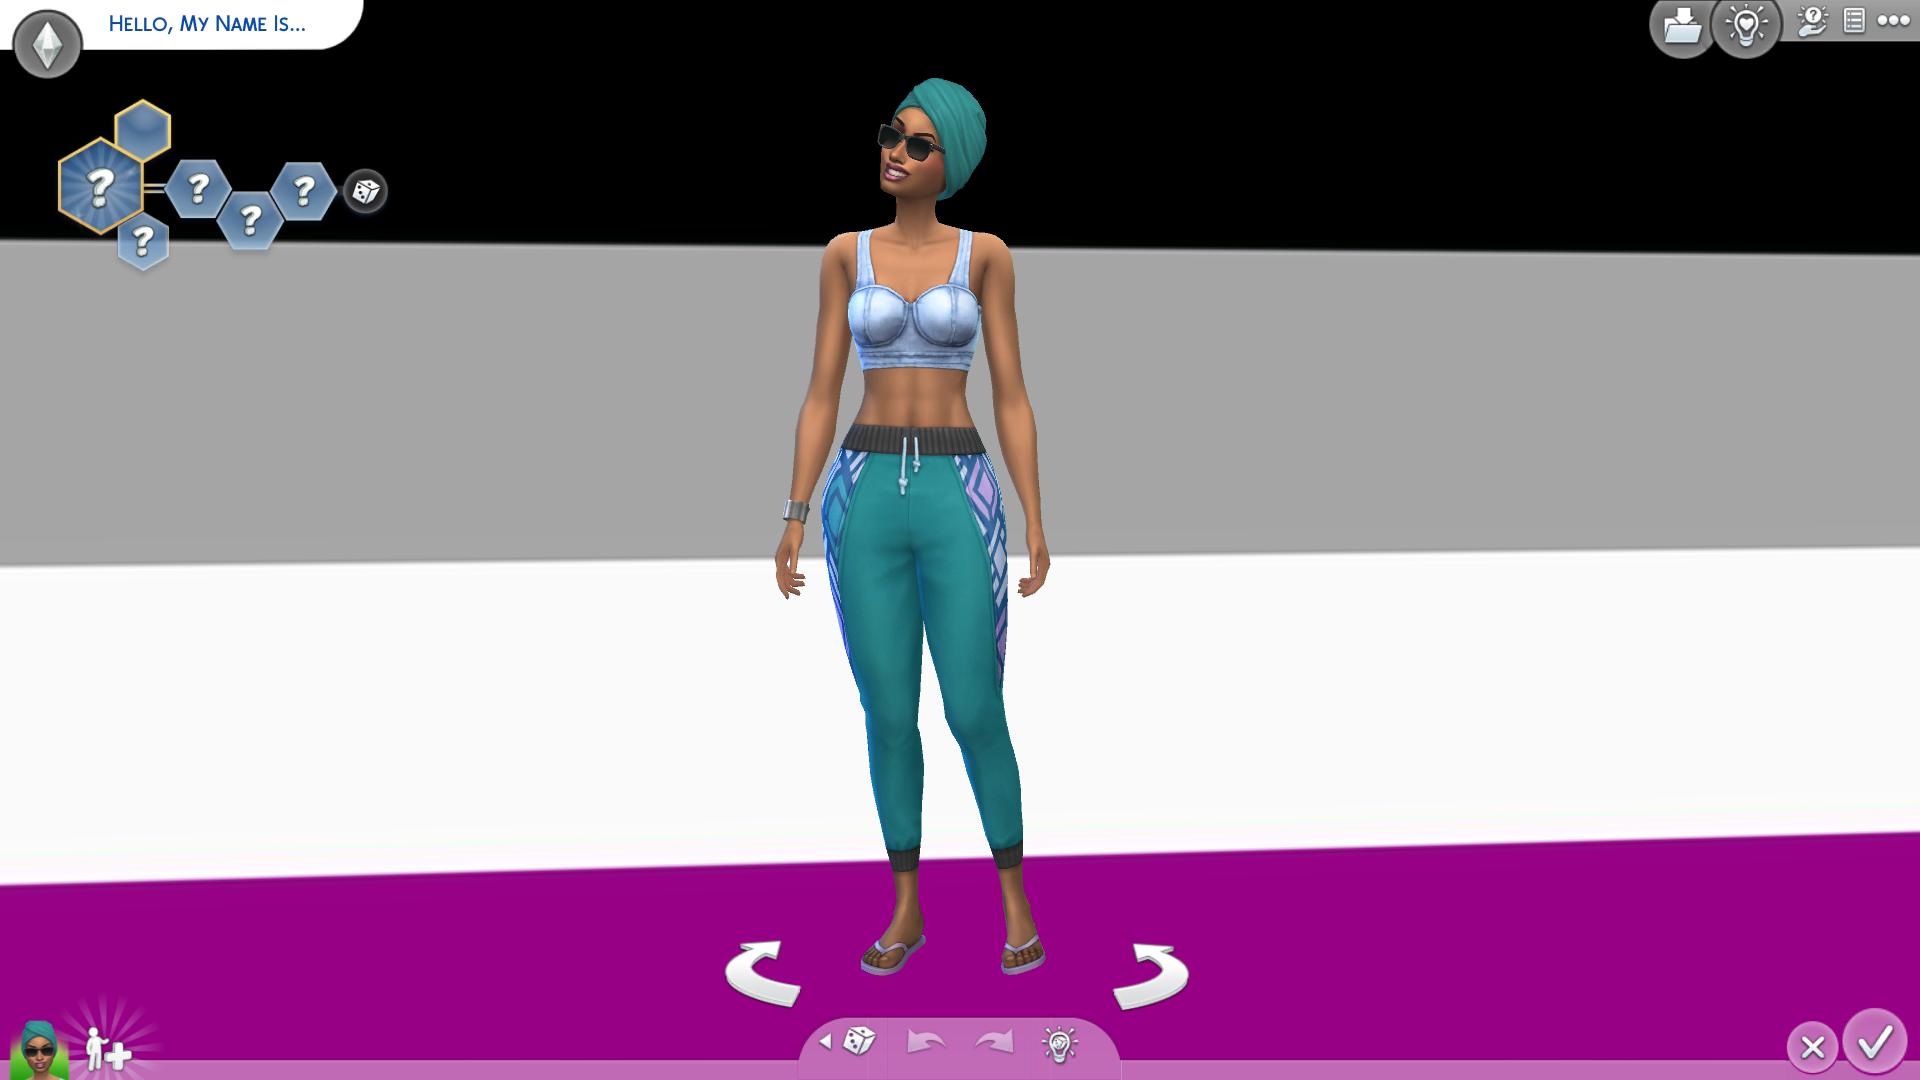 Pride CAS Background - The Sims 4 Mods - CurseForge